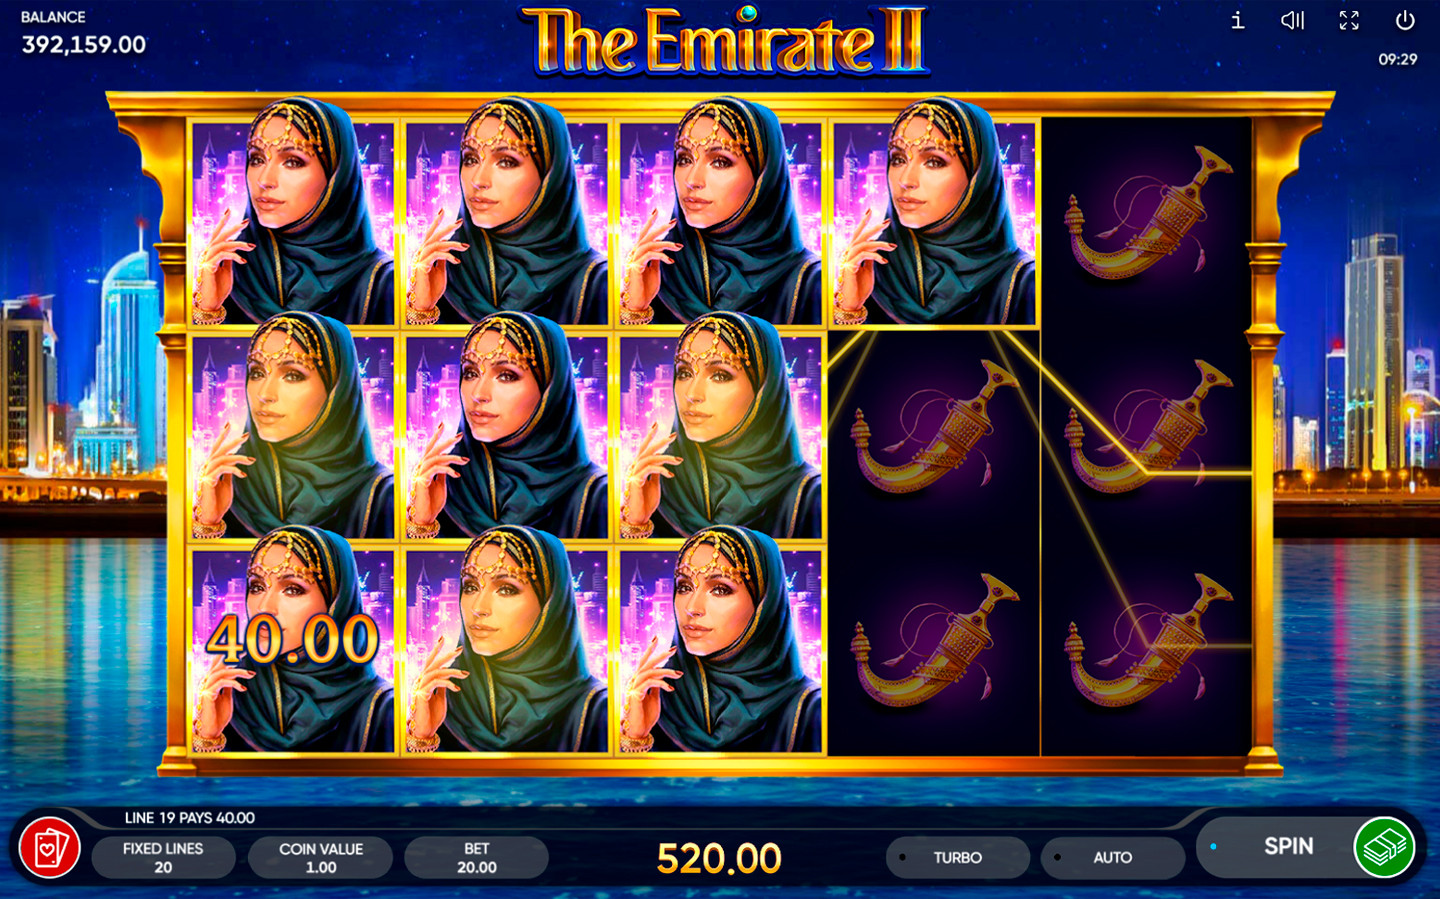 THE LATEST SLOT GAMES OF 2022 | Play the newest slot machine by Endorphina!